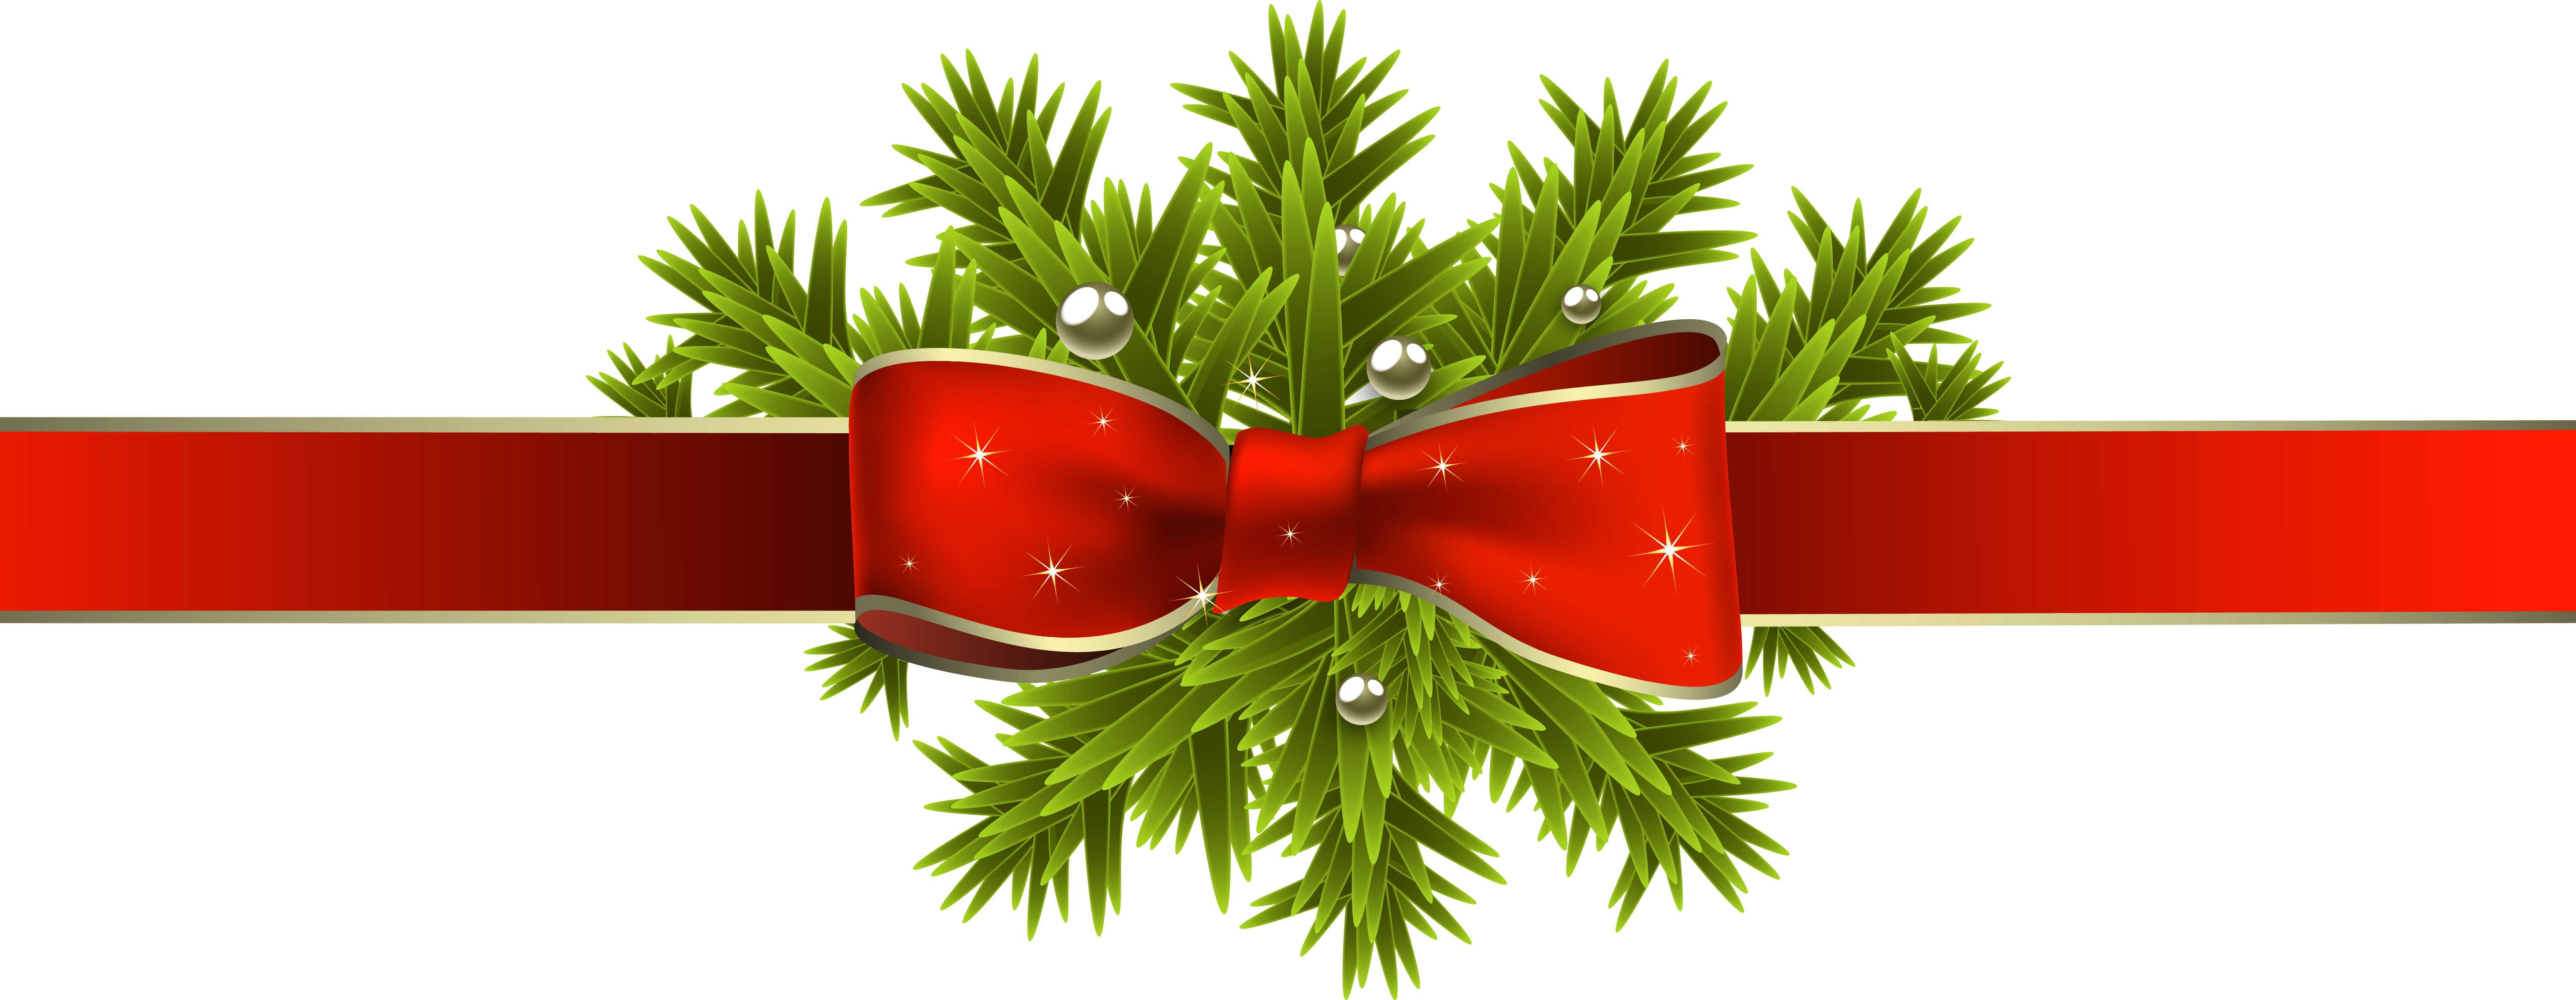 Red Christmas Ribbon with Pine Branches PNG Clipart Image 